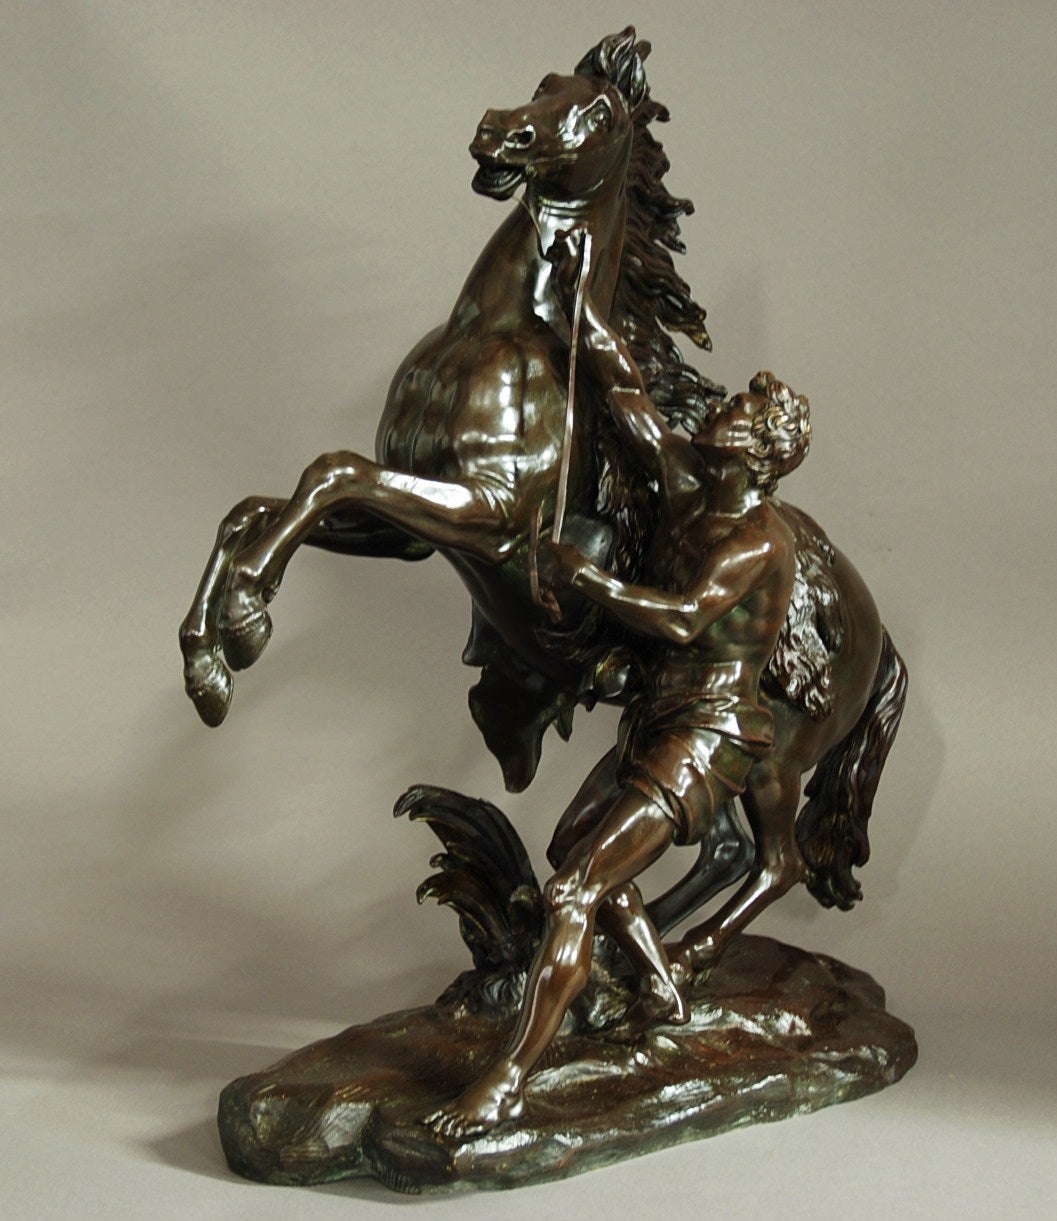 A late 19th century fine quality bronze Marly horse with his trainer, after Guillaume Coustou the Elder.

The original pair of horses were carved from marble and made for the Chateau de Marly between 1740-1745 and were then moved to the entrance